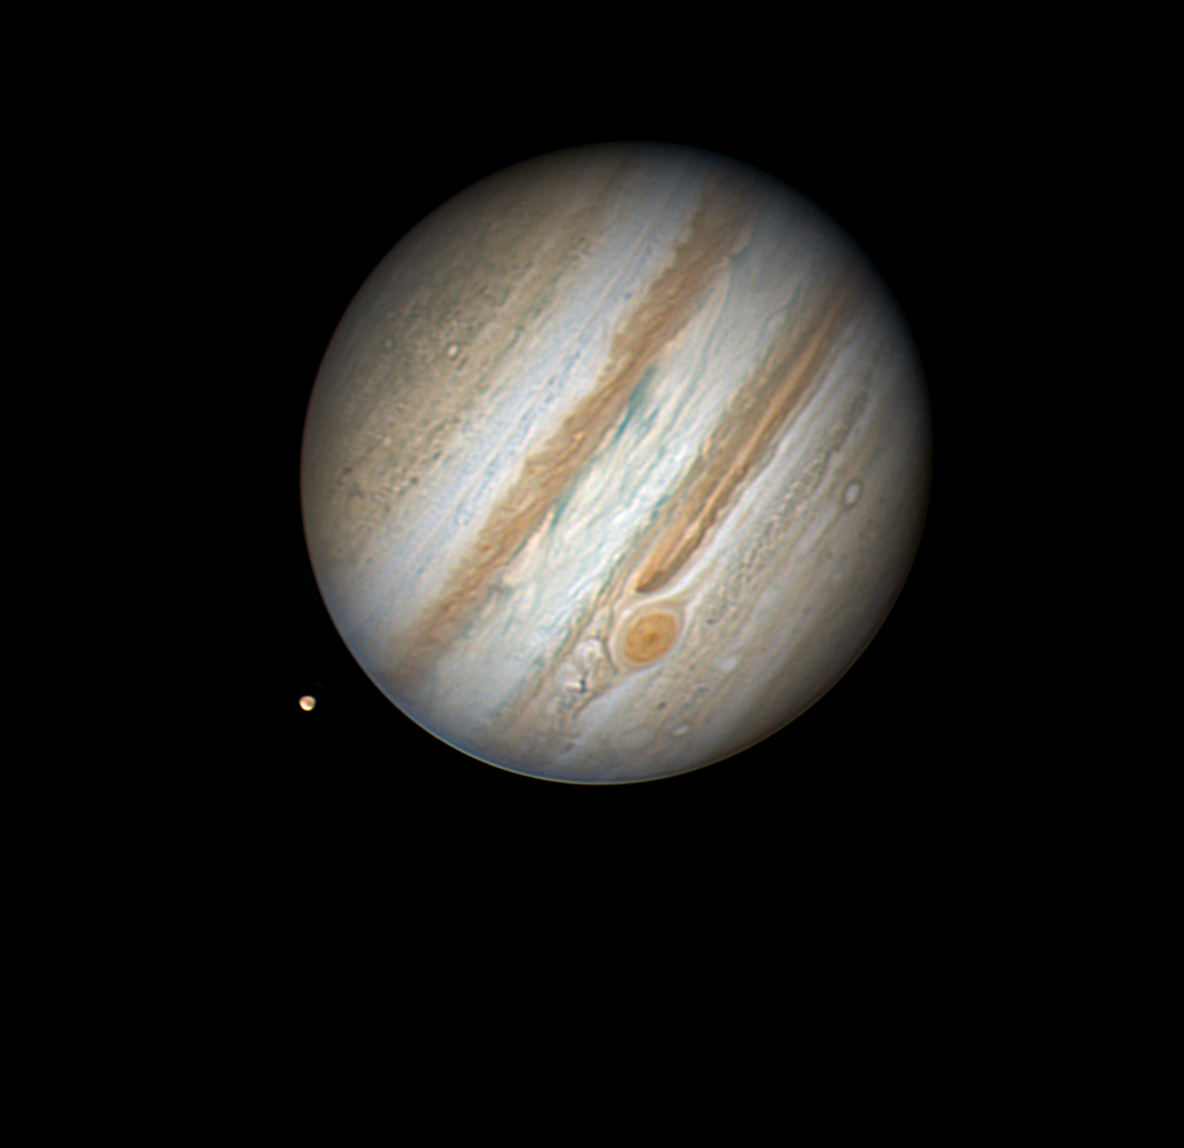 2023-09-14-0229_4-L-Jupiter_lapl5_ap684_WD_nn.png.2d0e59aea1a0126a55cc1dac550a3ded.png